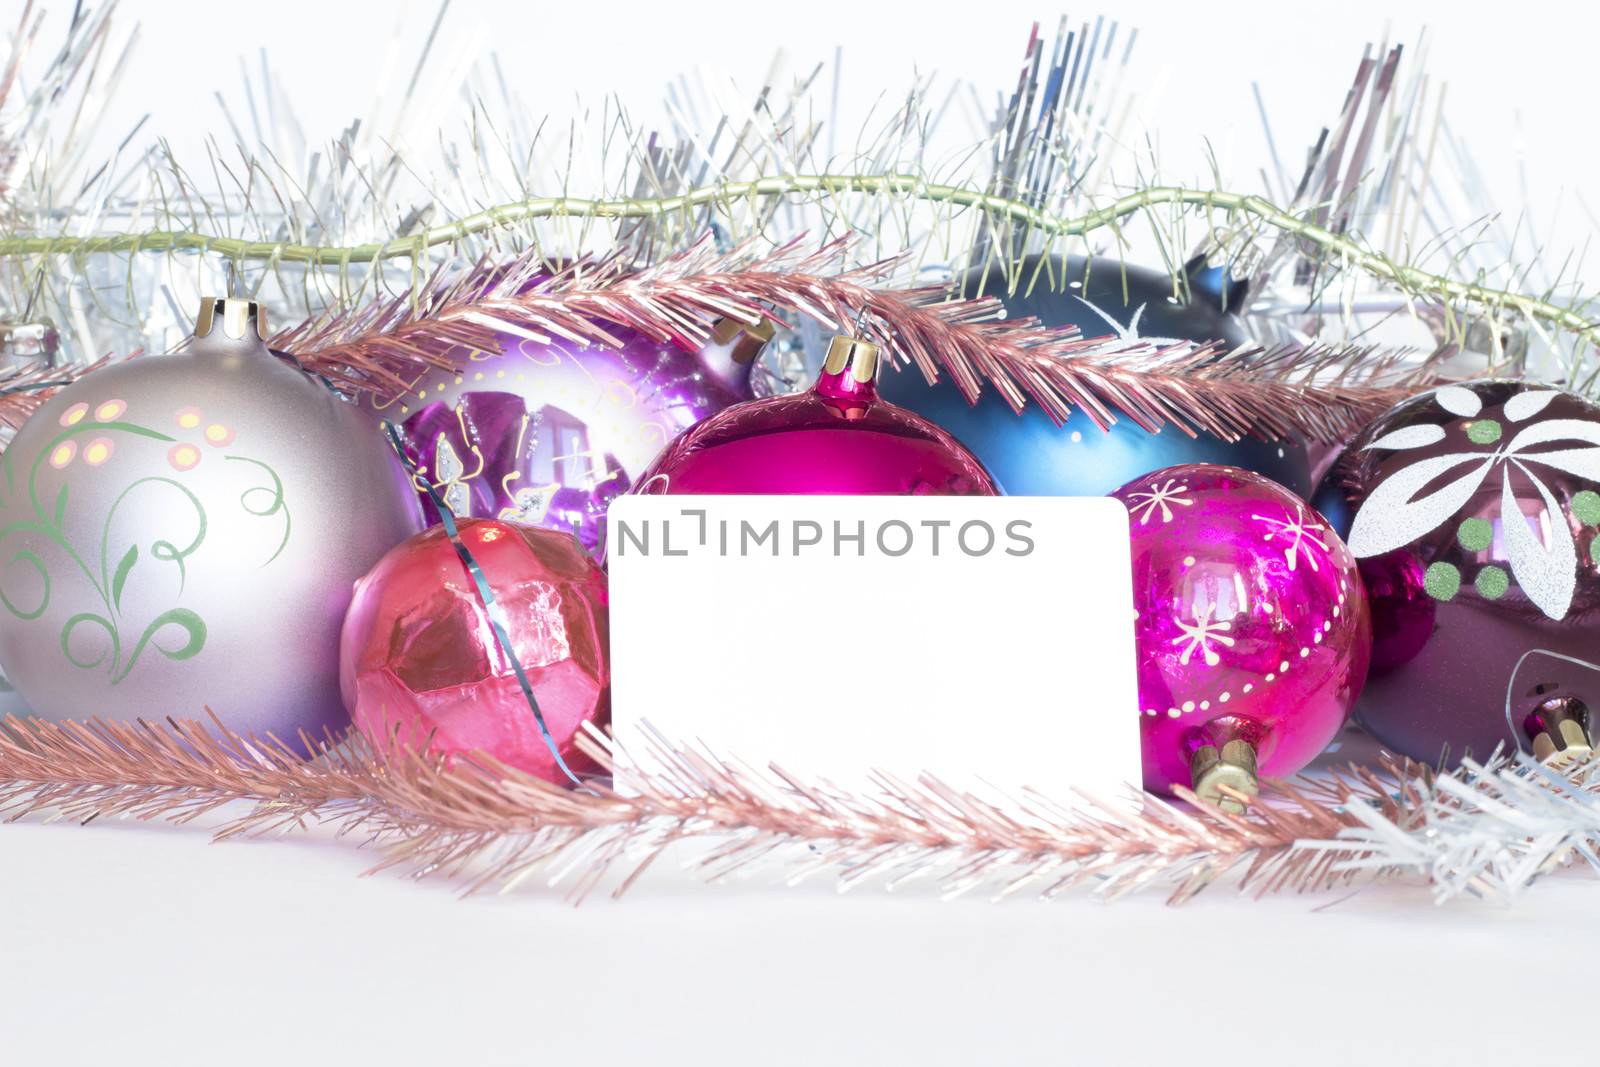 Arrangement of Christmas tree decorations by cherezoff